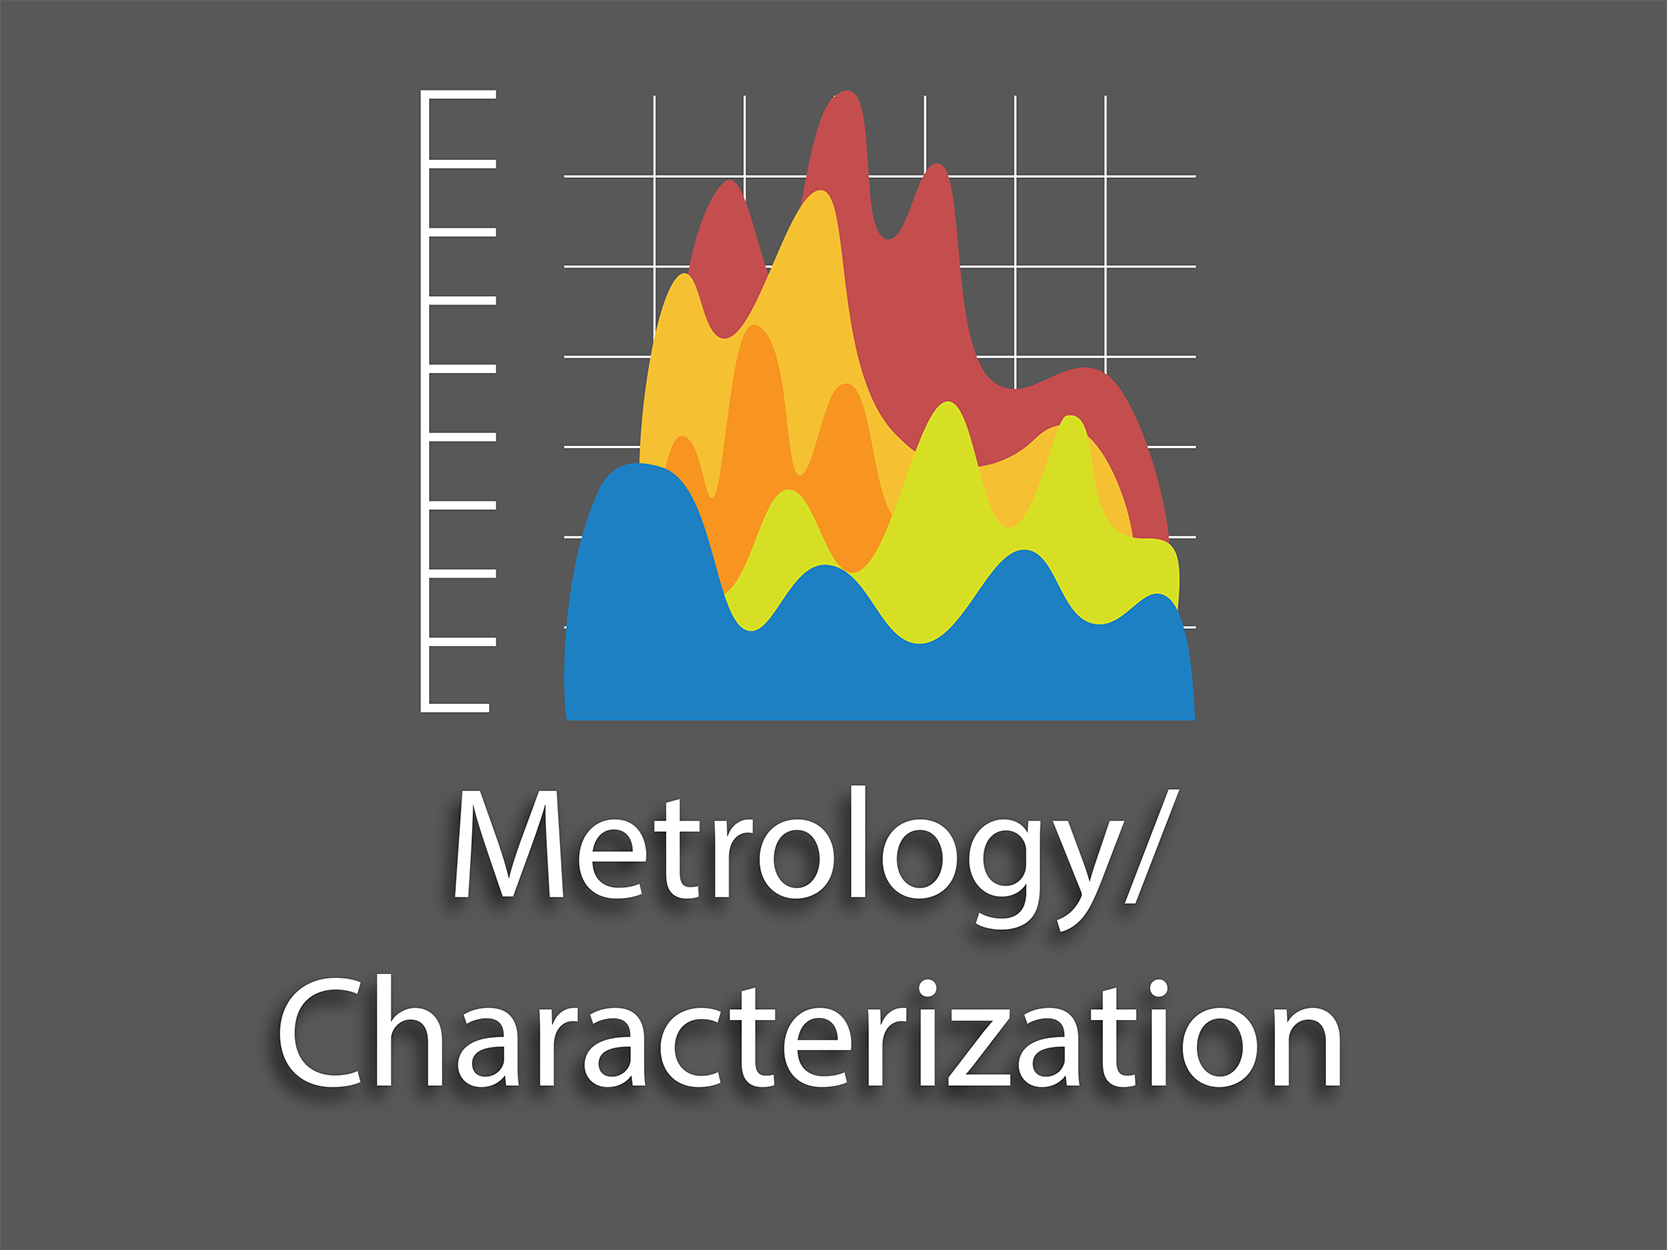 Click here to see the full list of metrology/characterization tools